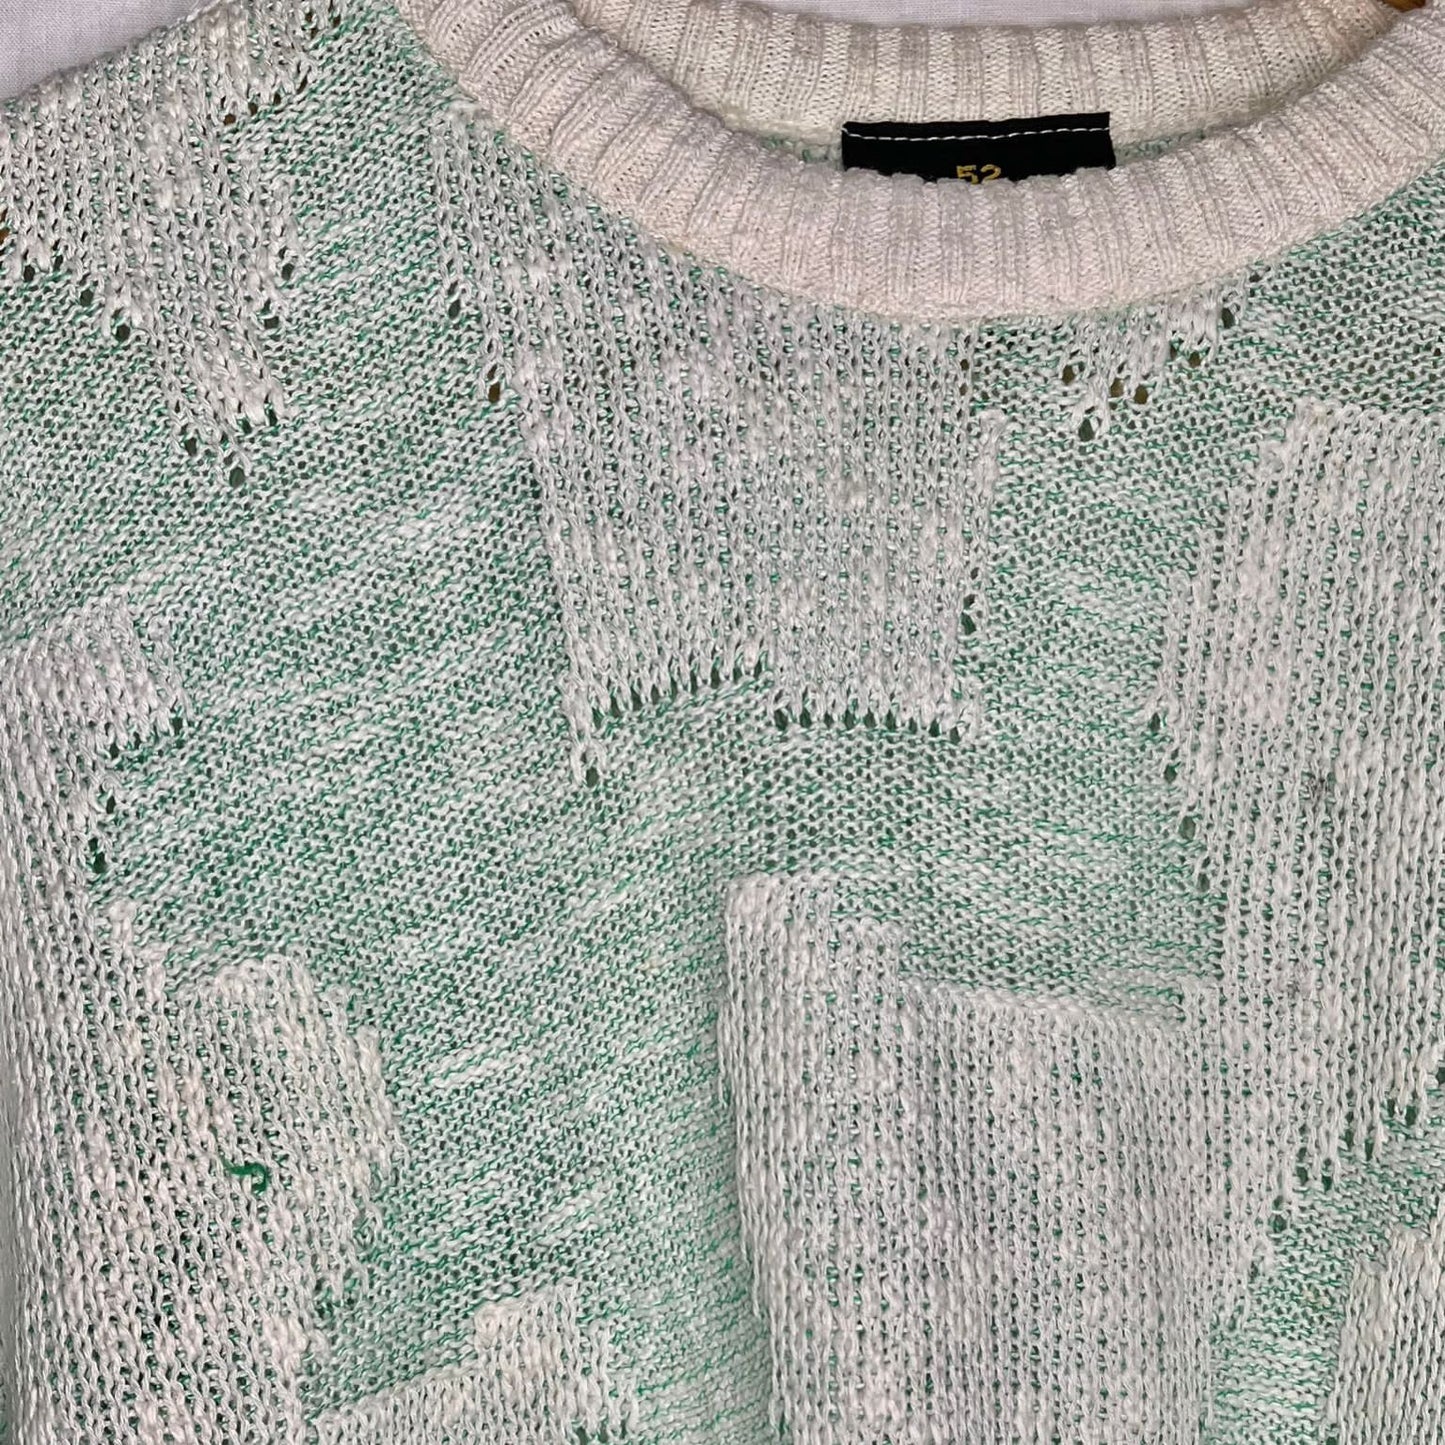 Vintage green and white sweater